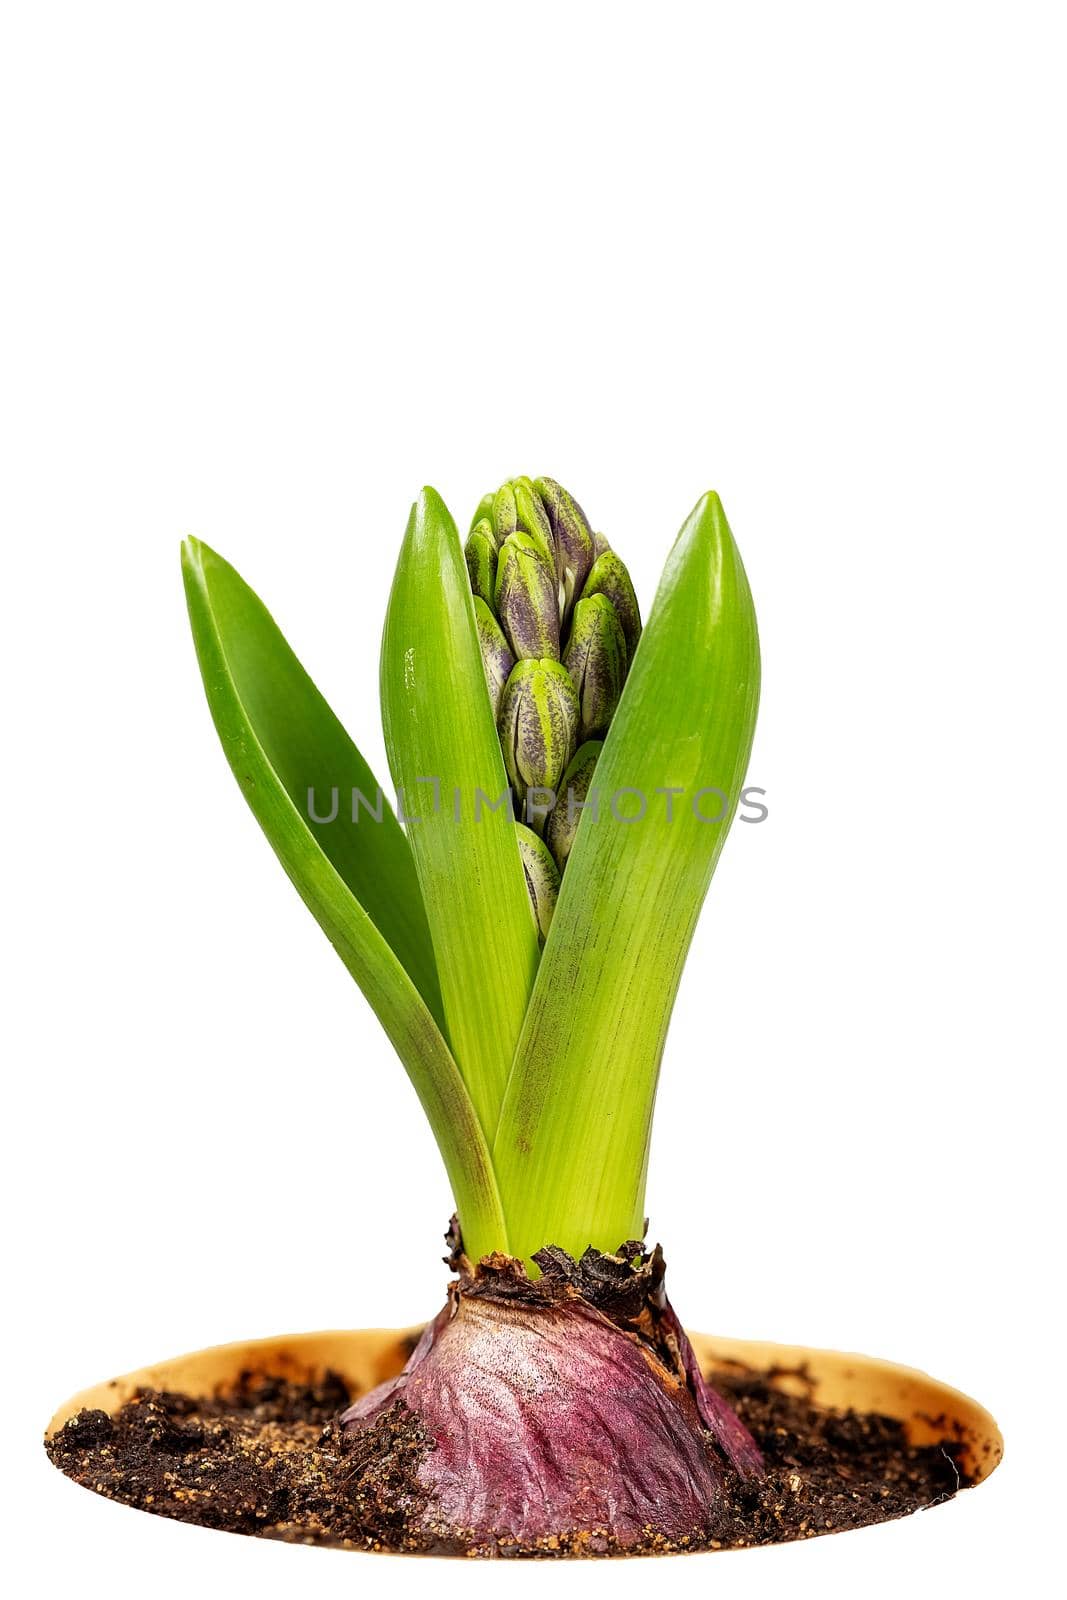 Close-up view of unblown hyacinth with green leaves and closed buds in a flower pot isolated on white background